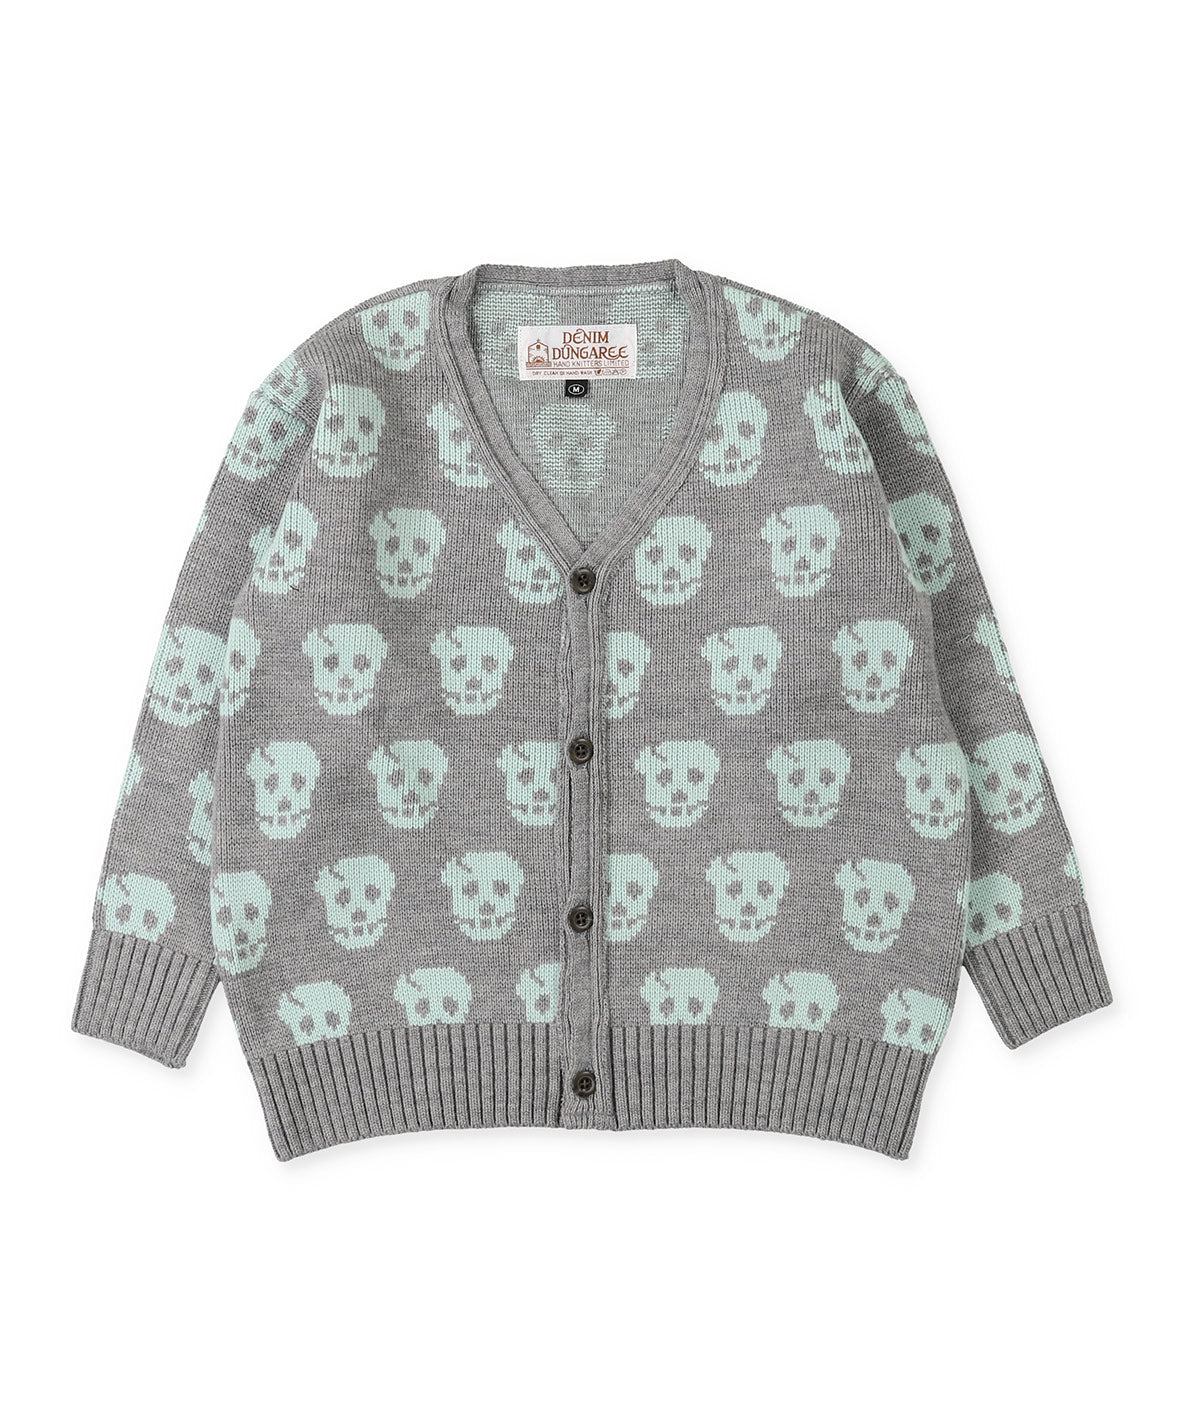 Skull Knit Cardigan – FITH ONLINE STORE